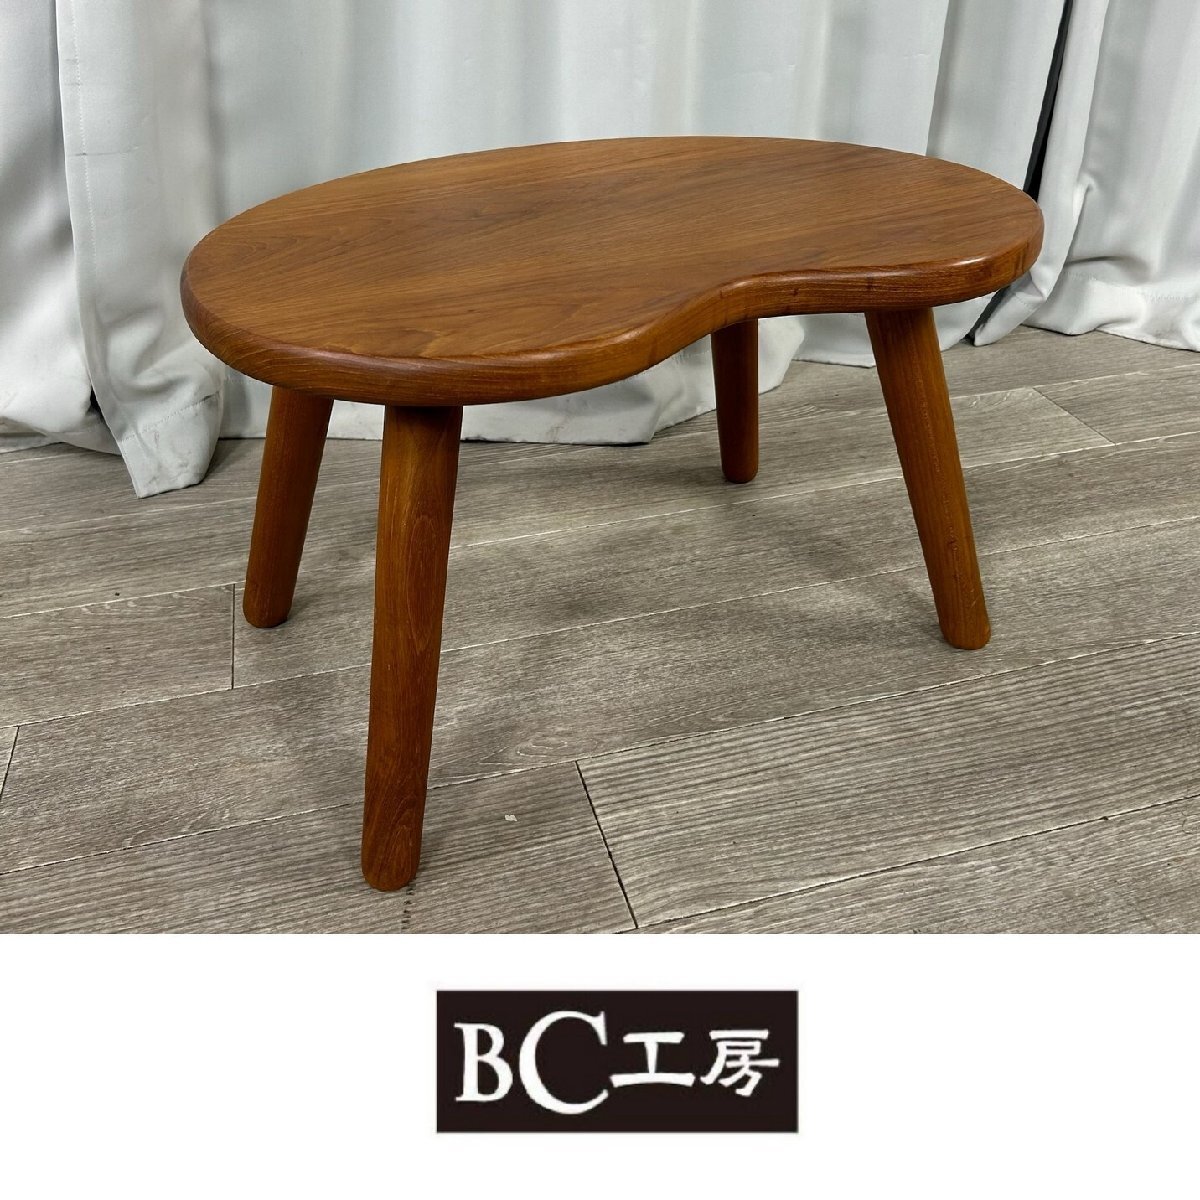 GZ41 BC atelier cheeks natural wood Cafe side table desk handcraft wooden atelier simple night table / Kanagawa prefecture .. city 